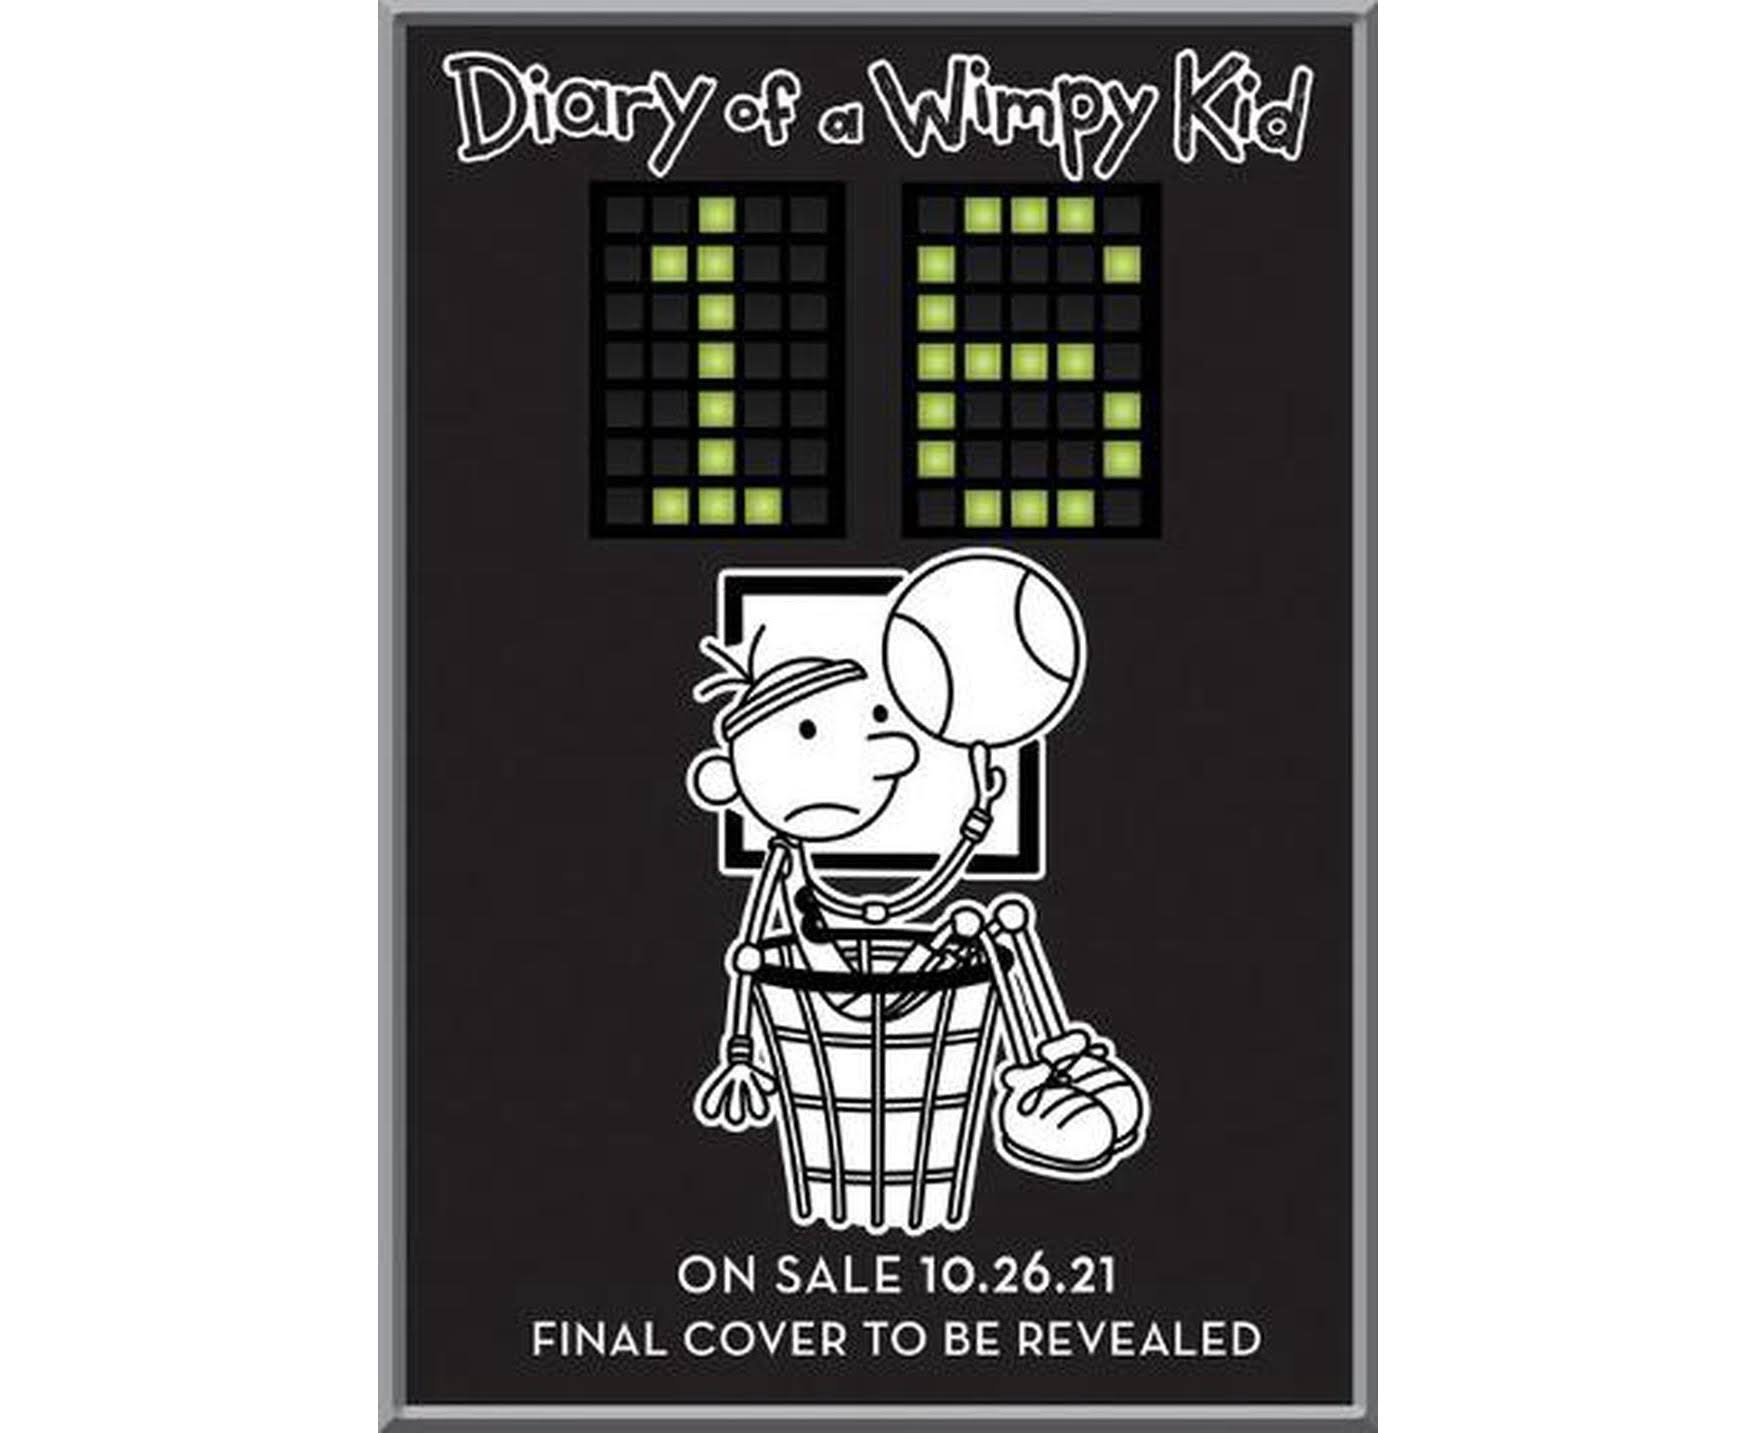 Big Shot (Diary of A Wimpy Kid Book 16) by Jeff Kinney